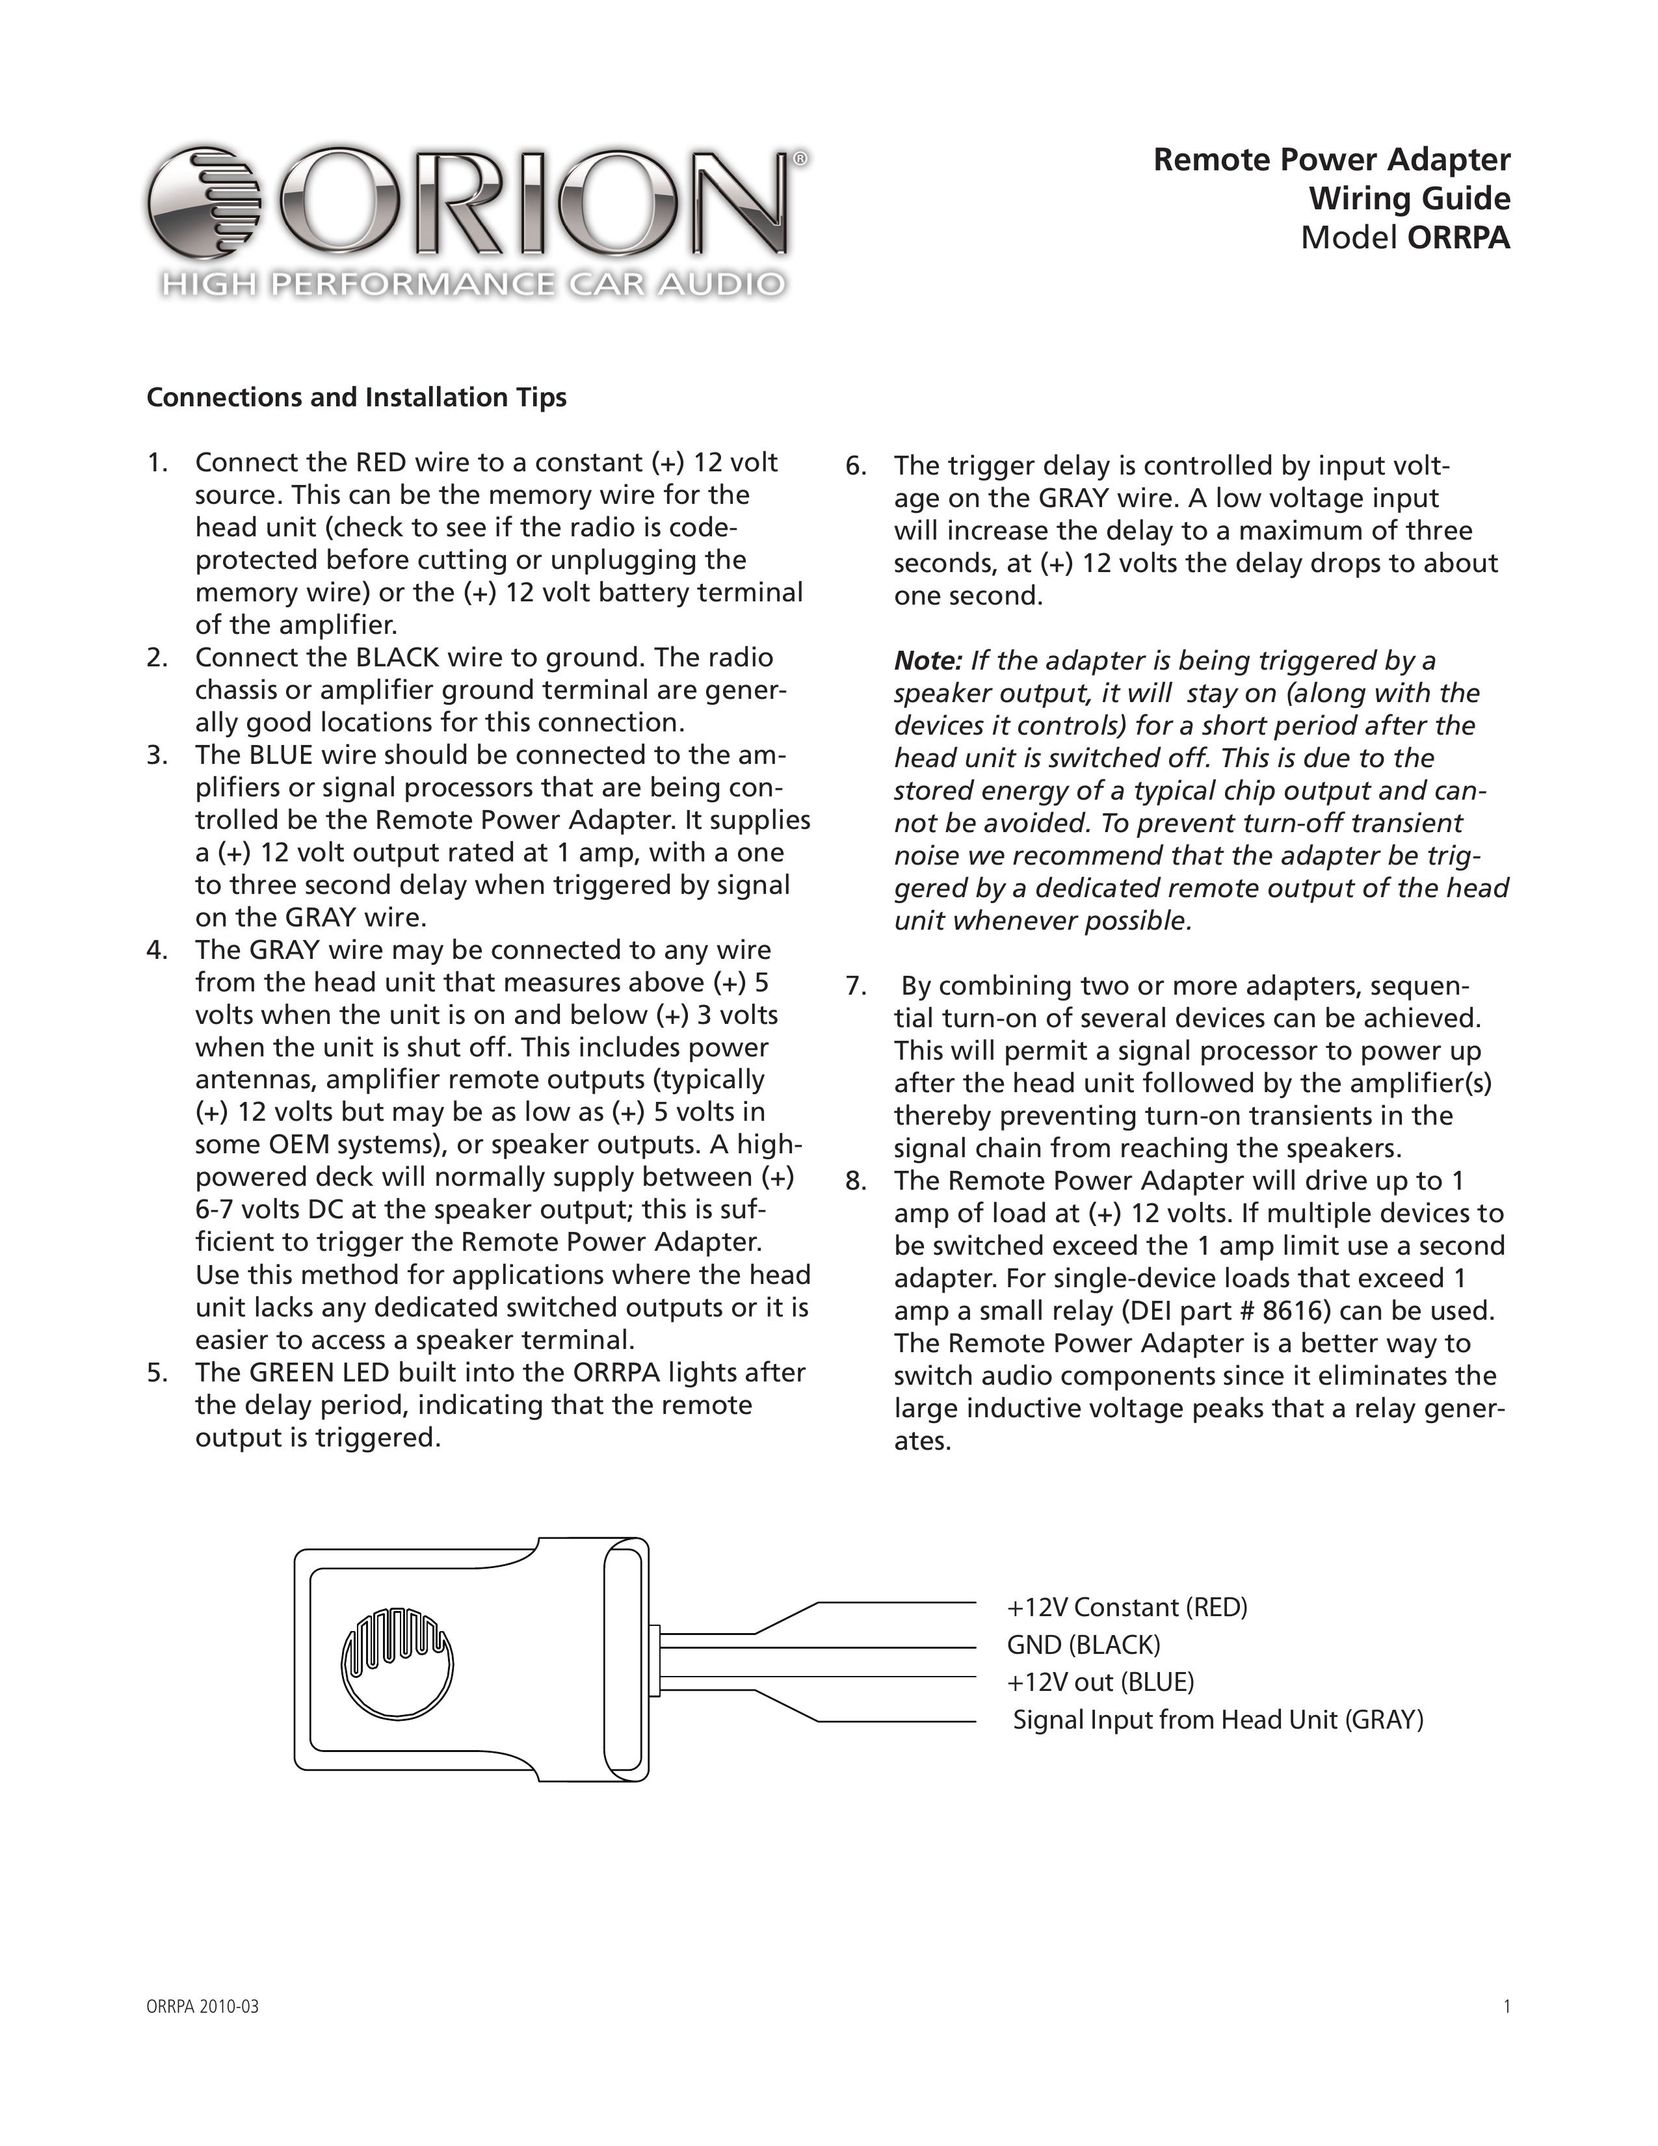 Orion Car Audio ORRPA Car Stereo System User Manual